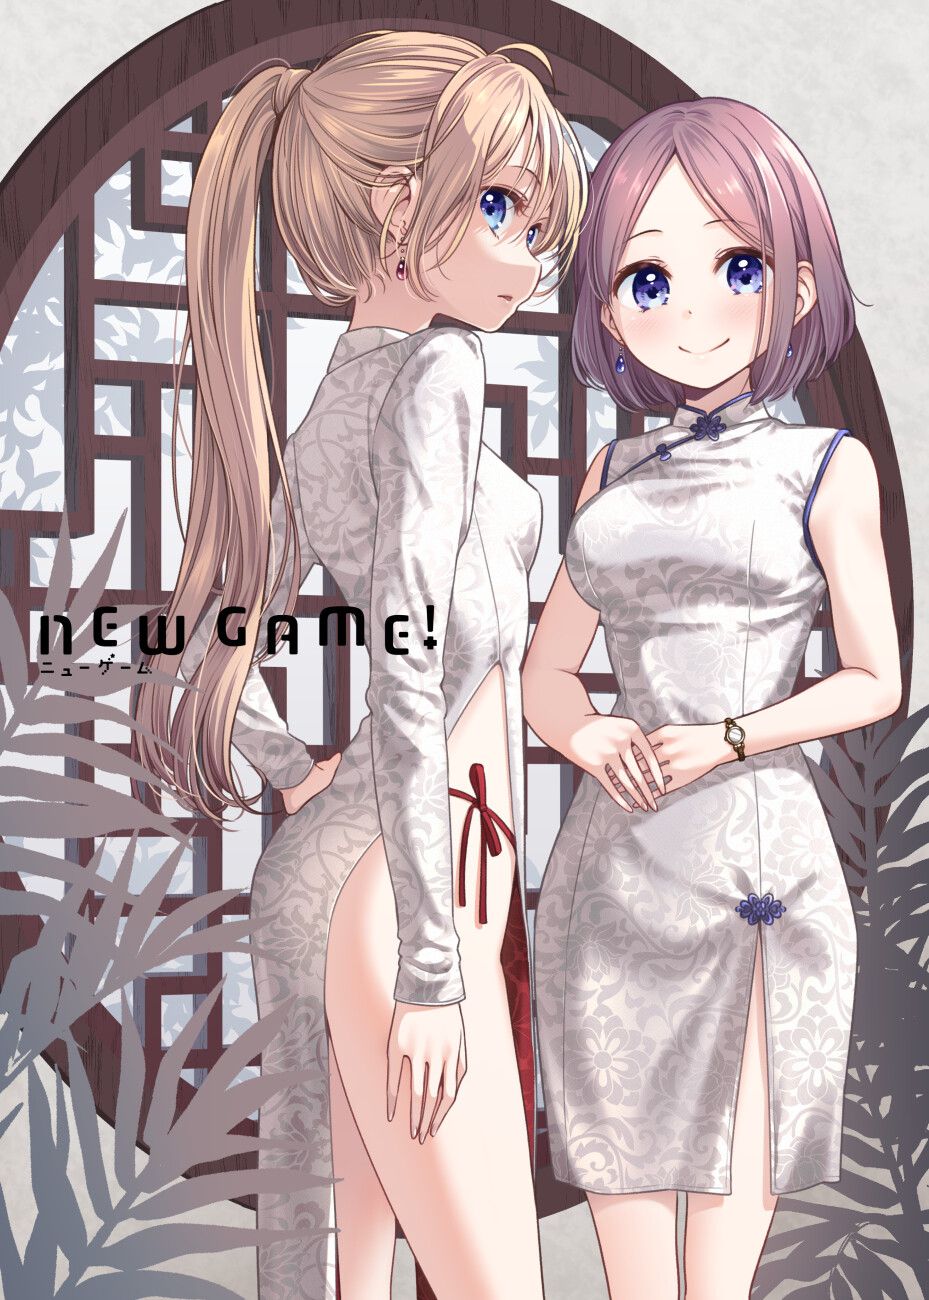 Manga "NEW GAME!" The final 13 volumes and the store perks of the art book are too many illustrations of girls! 12